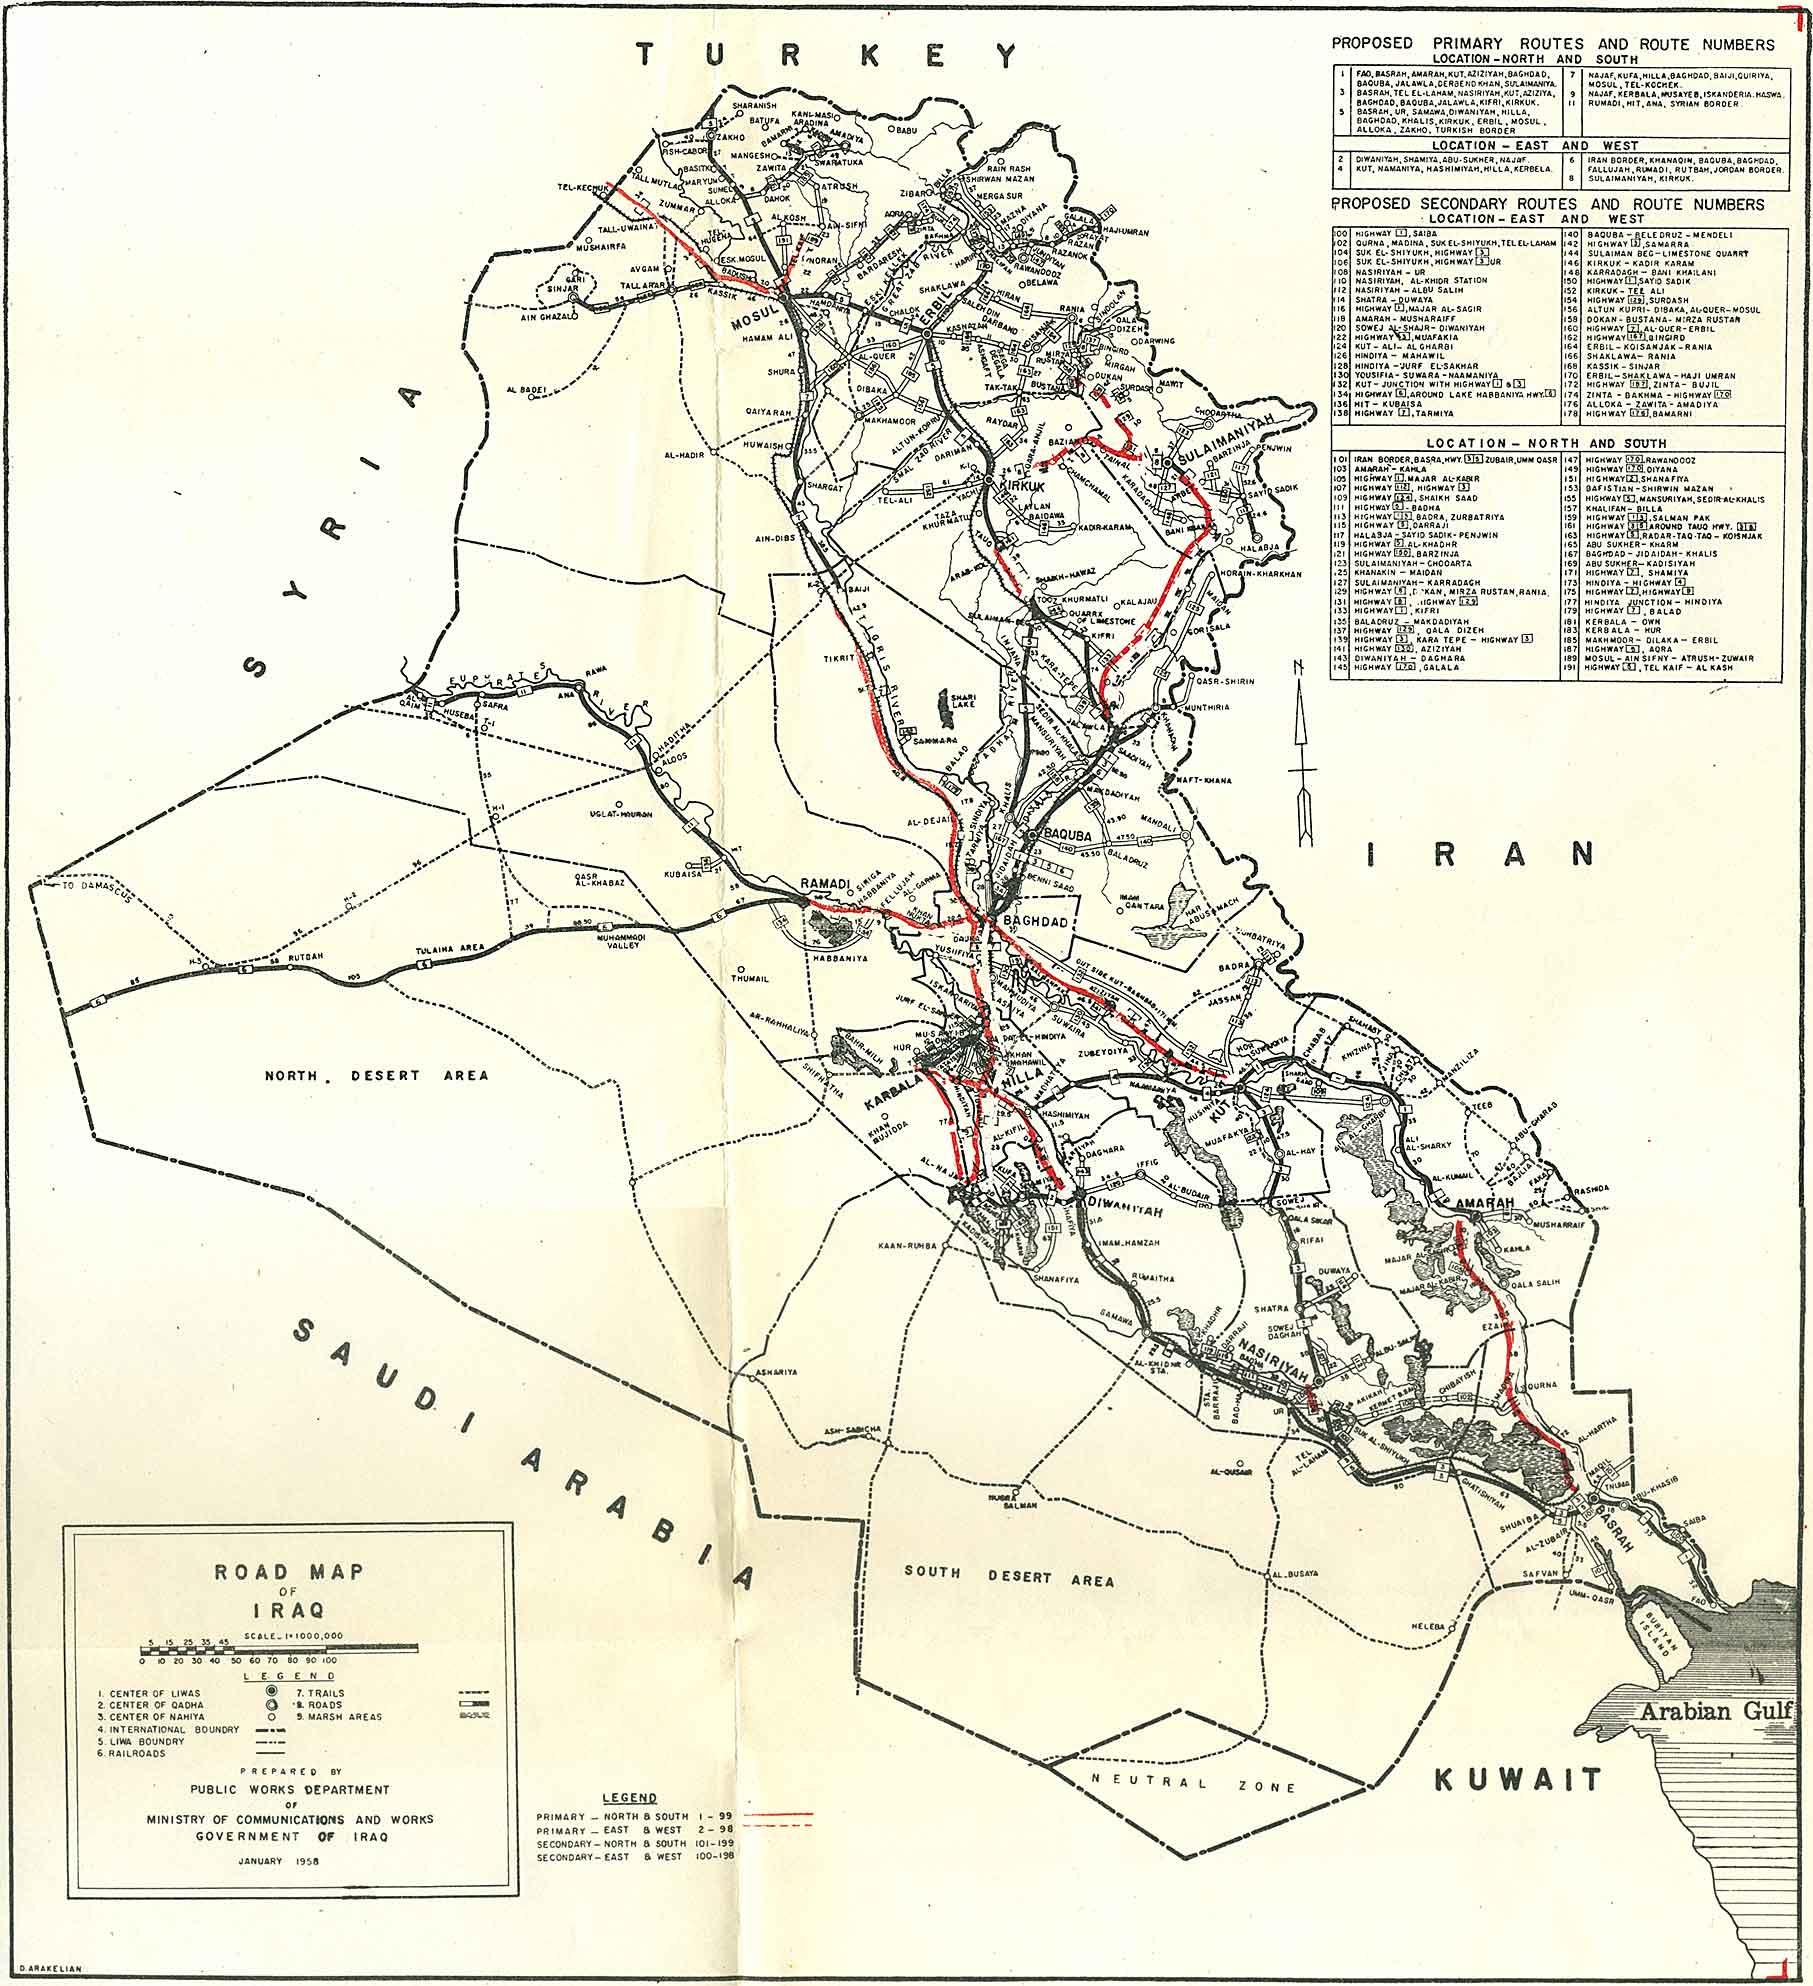 Map of Iraq's road network in 1961 printed size 63.96cm wide x 70.06cm high